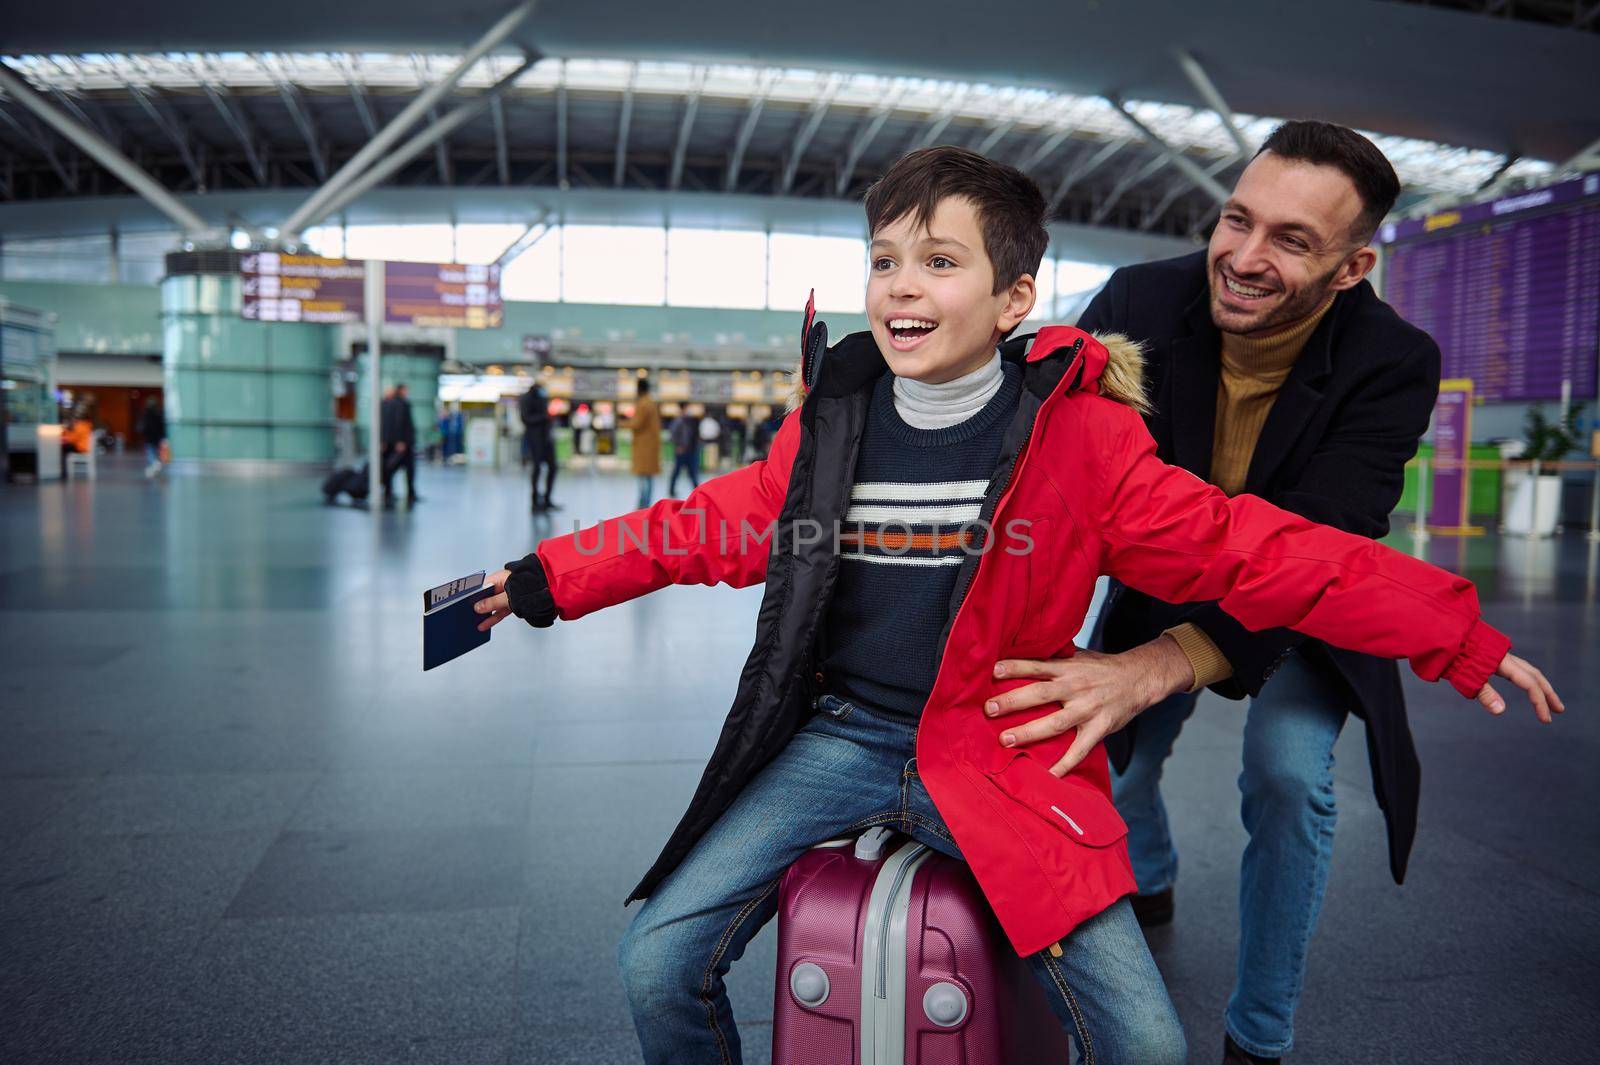 Charming Caucasian boy with a passport and a boarding pass in his outstretched hands while his dad is riding him on a suitcase in the departure hall of the airport, awaiting check-in for a flight by artgf